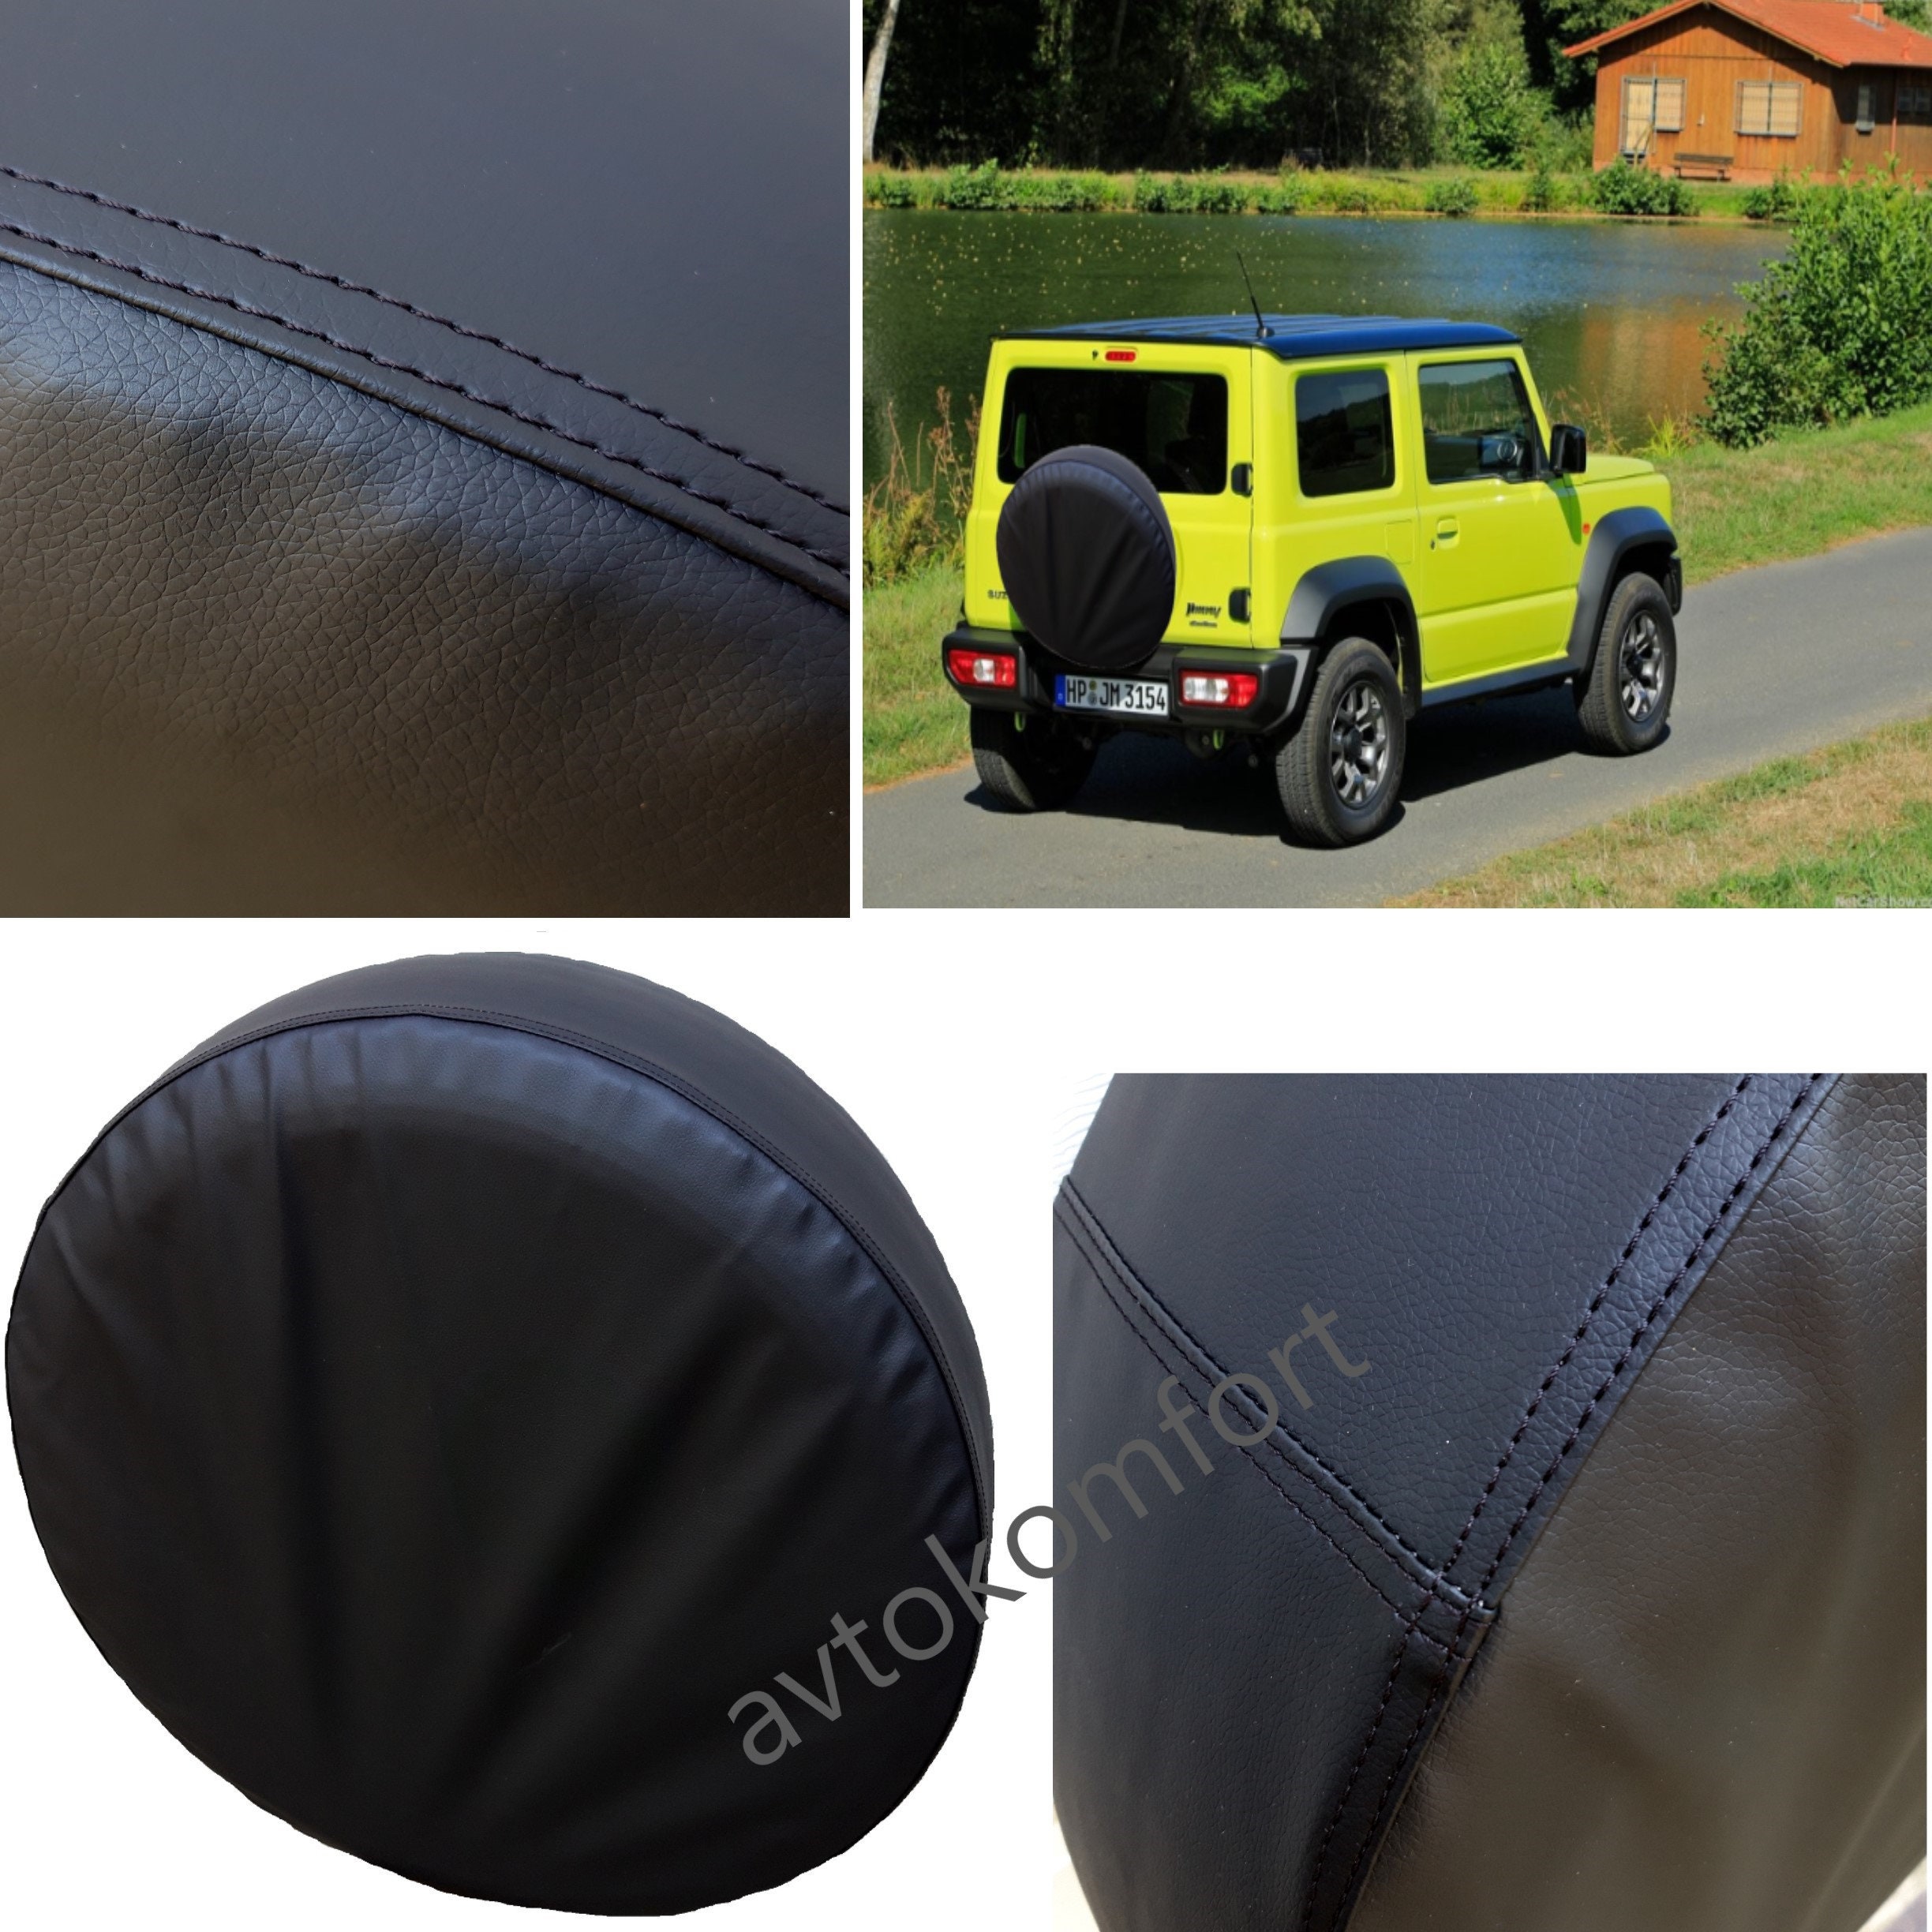 Spare Tire Cover for a Jeep Wrangler Etsy Sweden